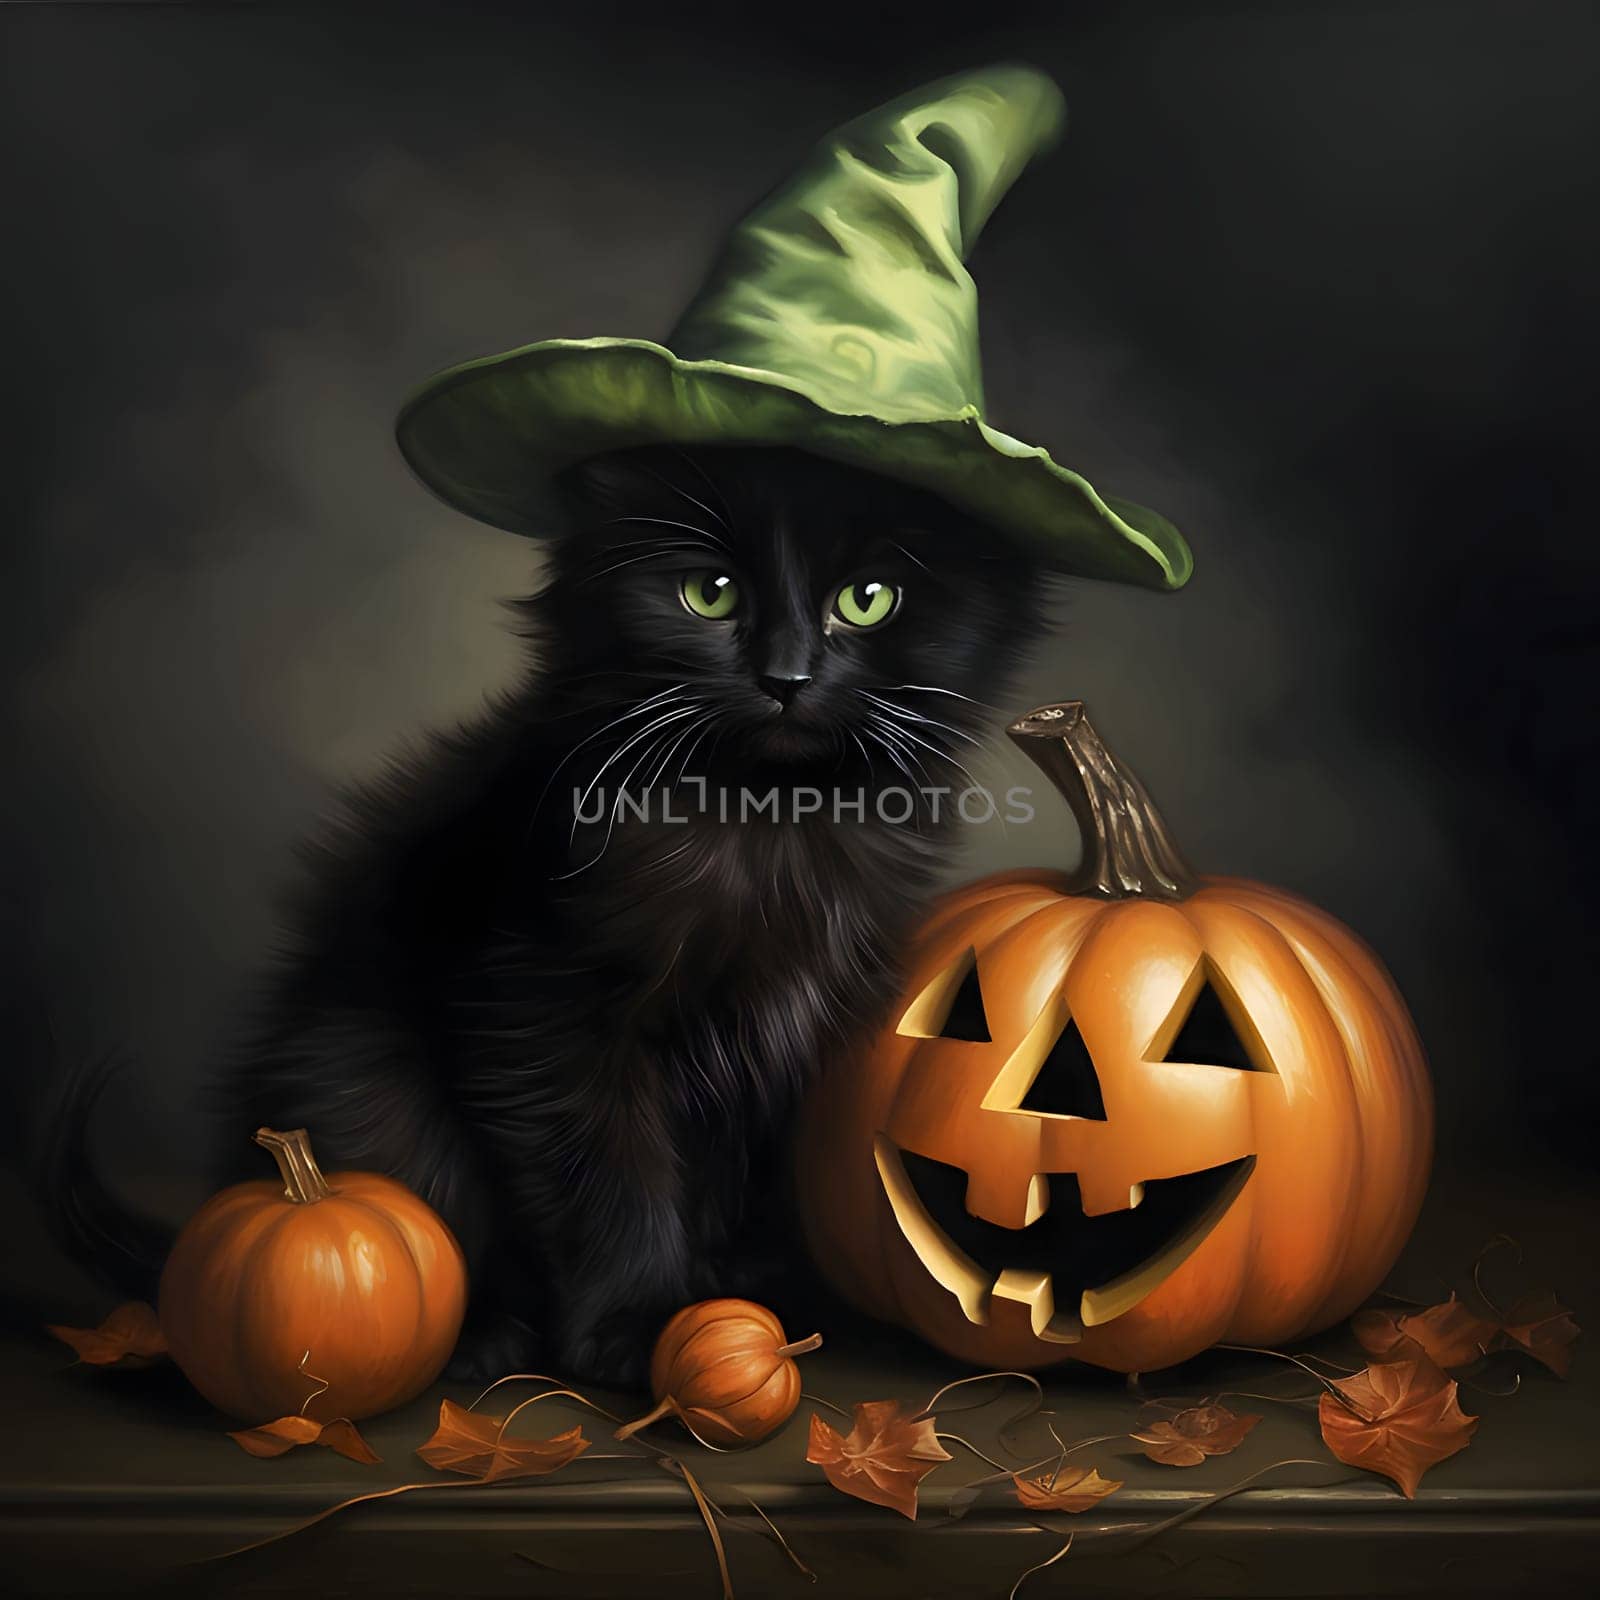 Black cat with green witch hat, next to it pumpkins dark smudged background., a Halloween image. Atmosphere of darkness and fear.